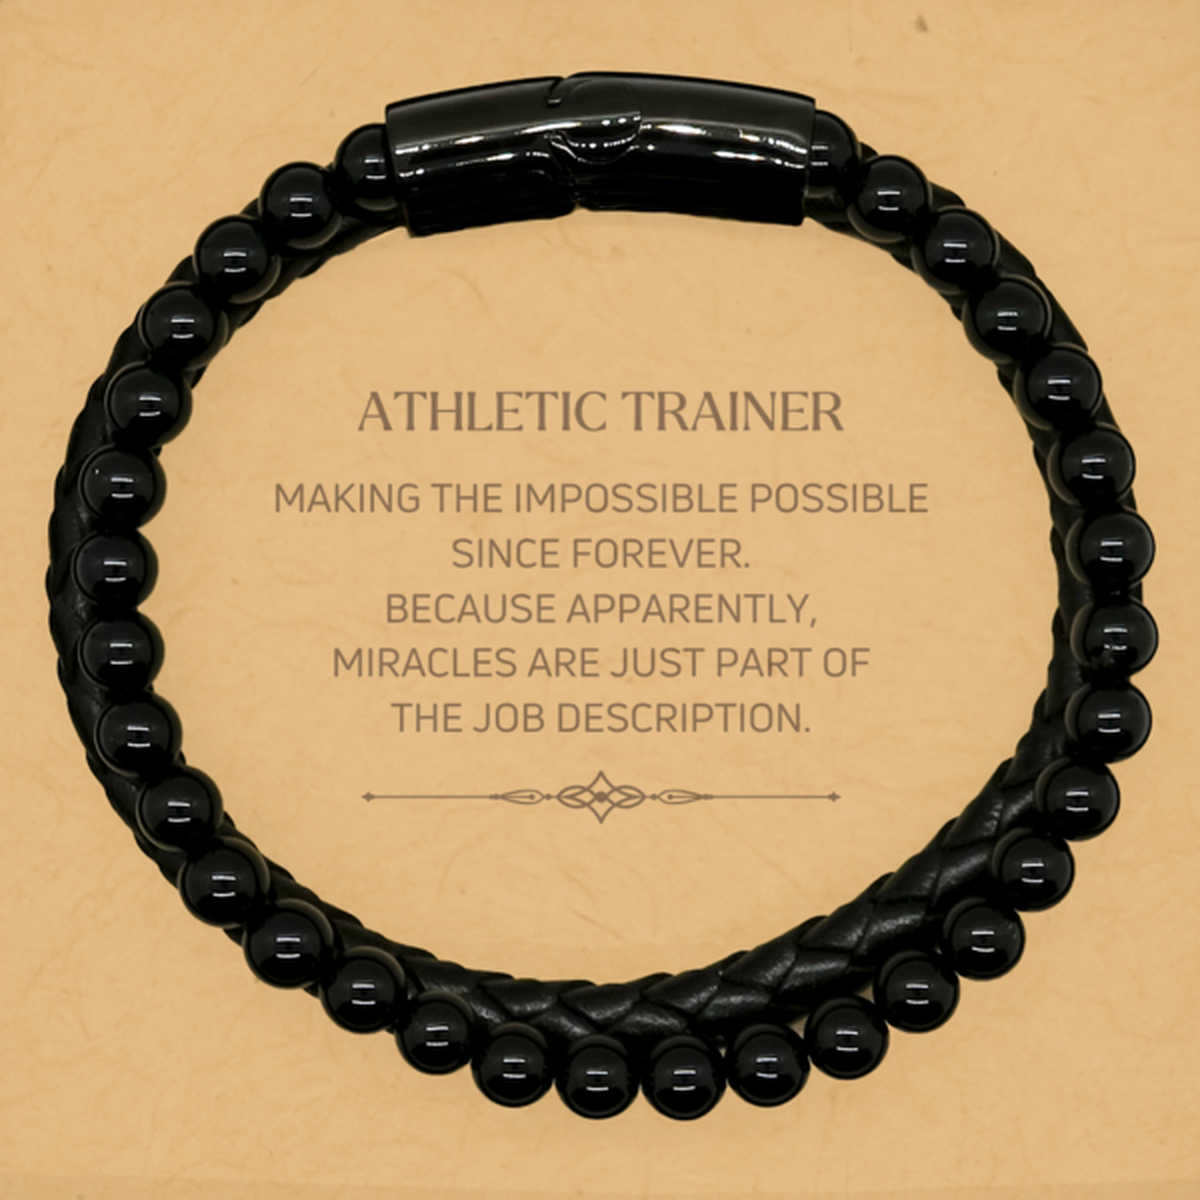 Funny Athletic Trainer Gifts, Miracles are just part of the job description, Inspirational Birthday Stone Leather Bracelets For Athletic Trainer, Men, Women, Coworkers, Friends, Boss